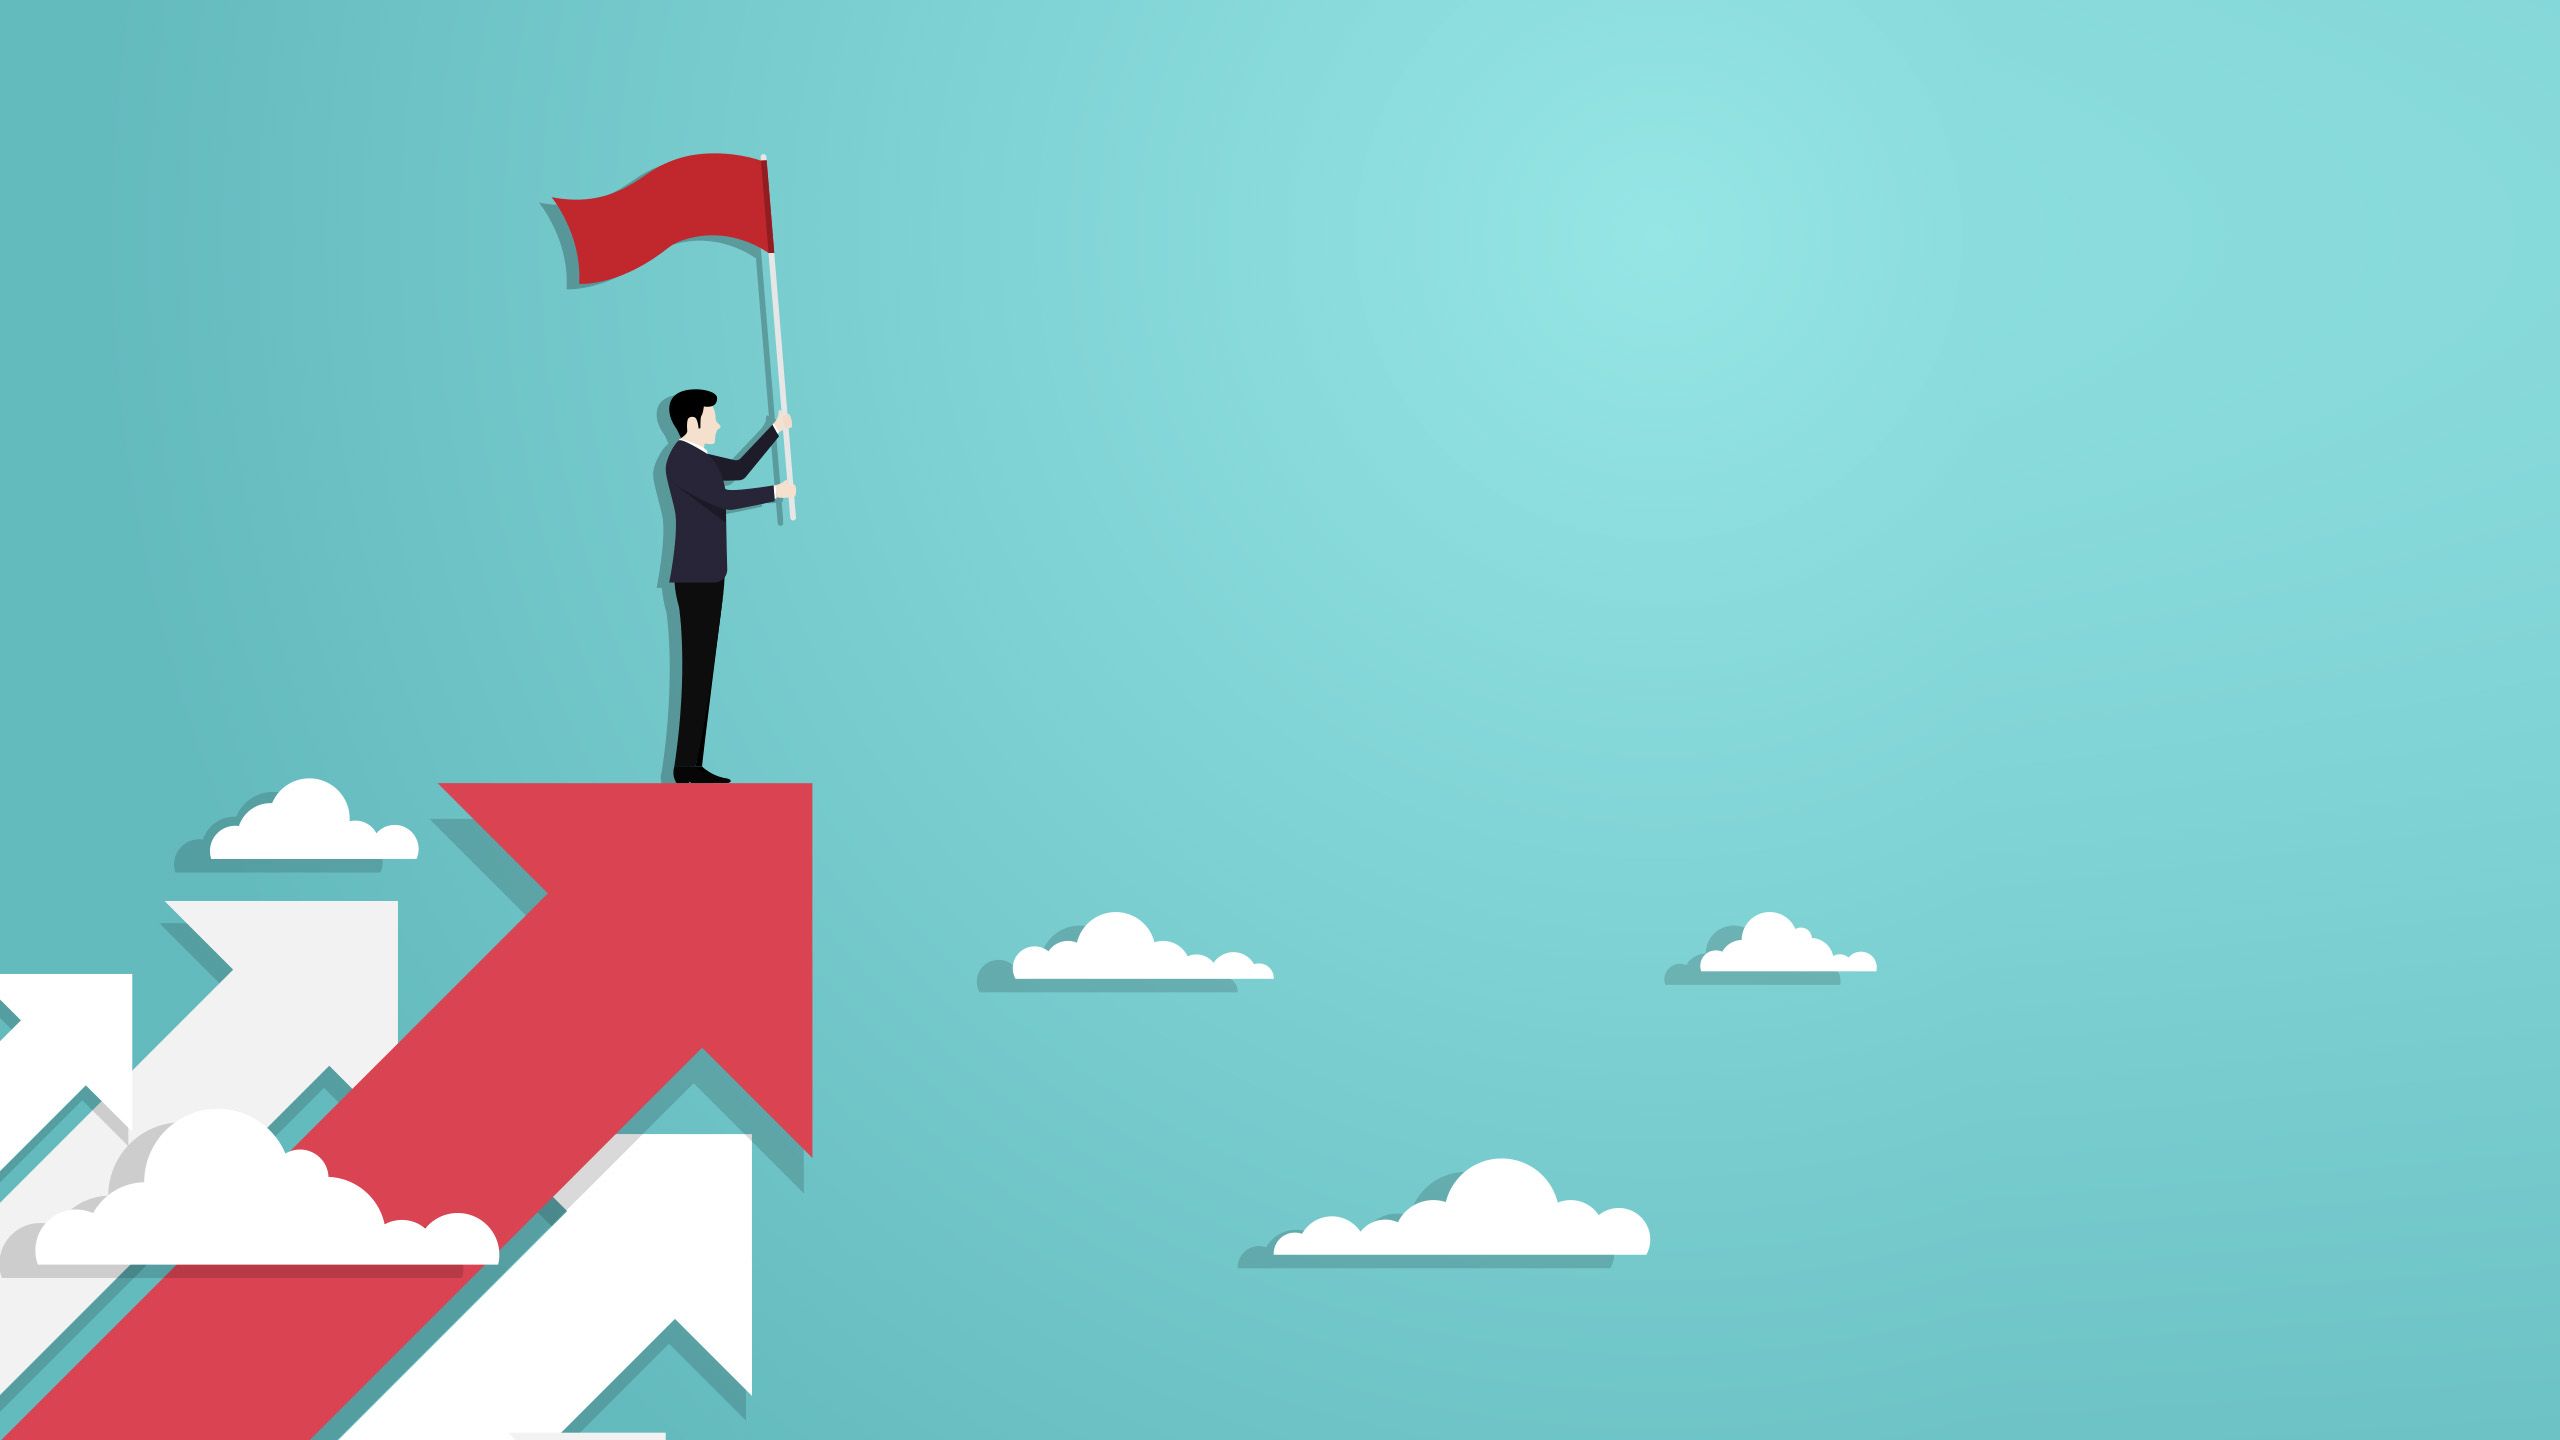 Illustration of man holding a flag, with an arrow indicating content success.